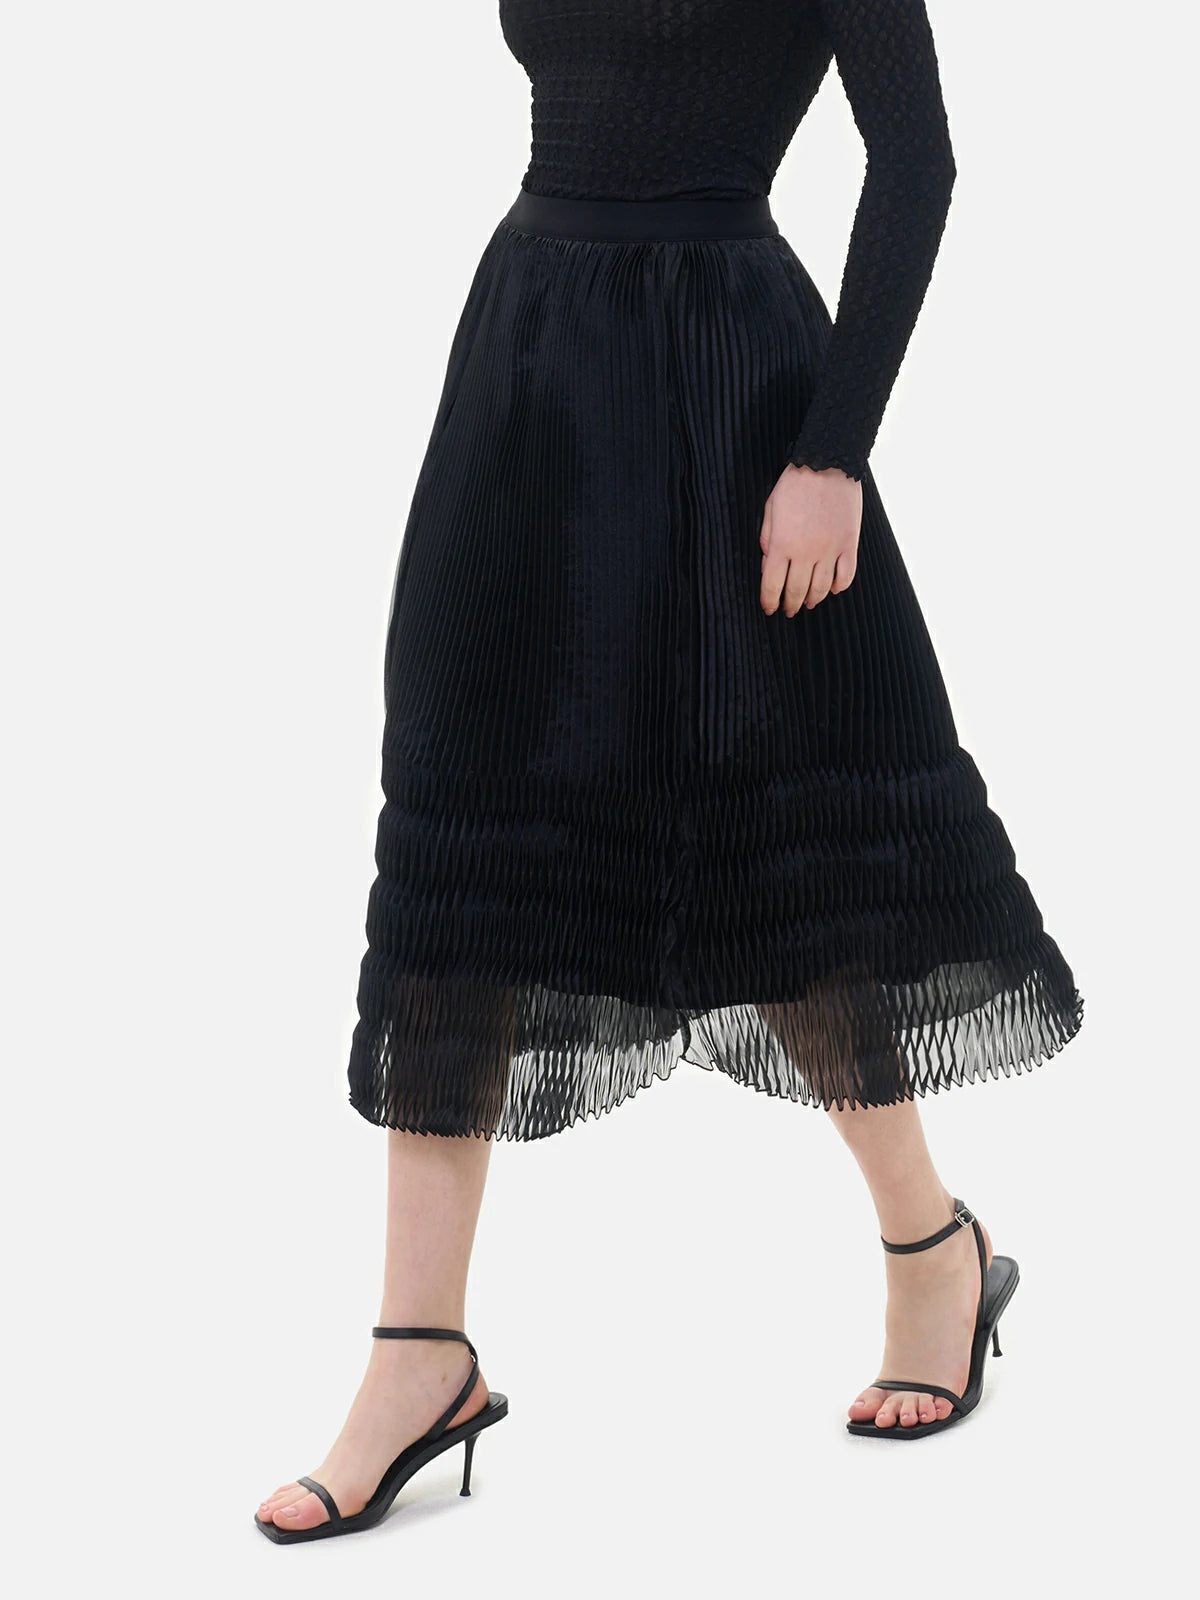 A black semi-transparent skirt with V-shaped pleats, presenting a mysterious allure and flowing lines.